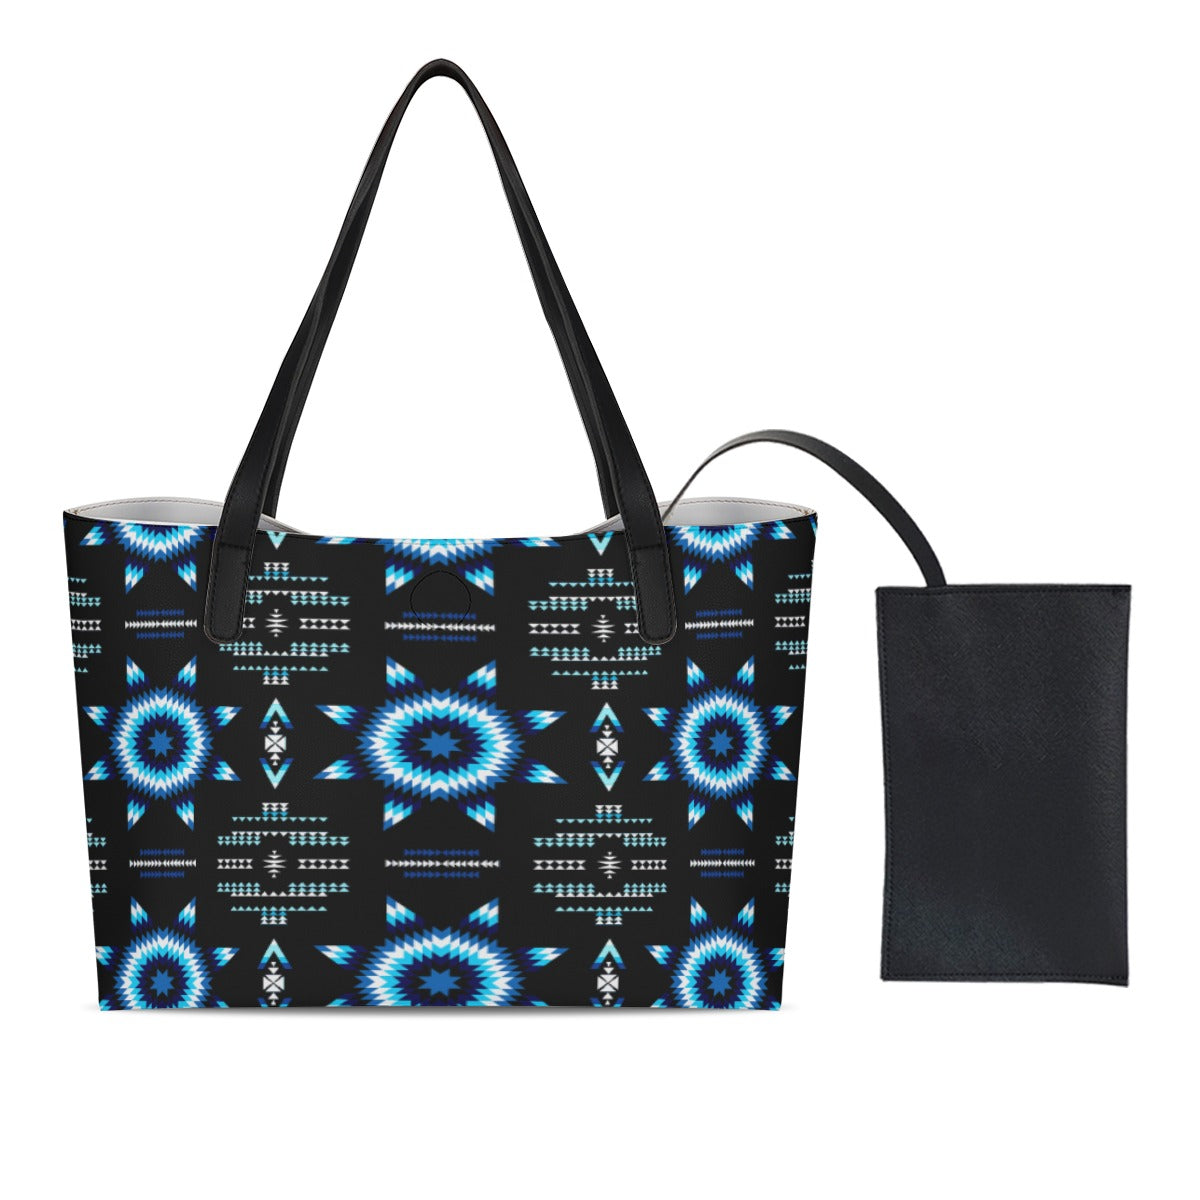 Rising Star Wolf Moon Shopping Tote Bag With Black Mini Purse